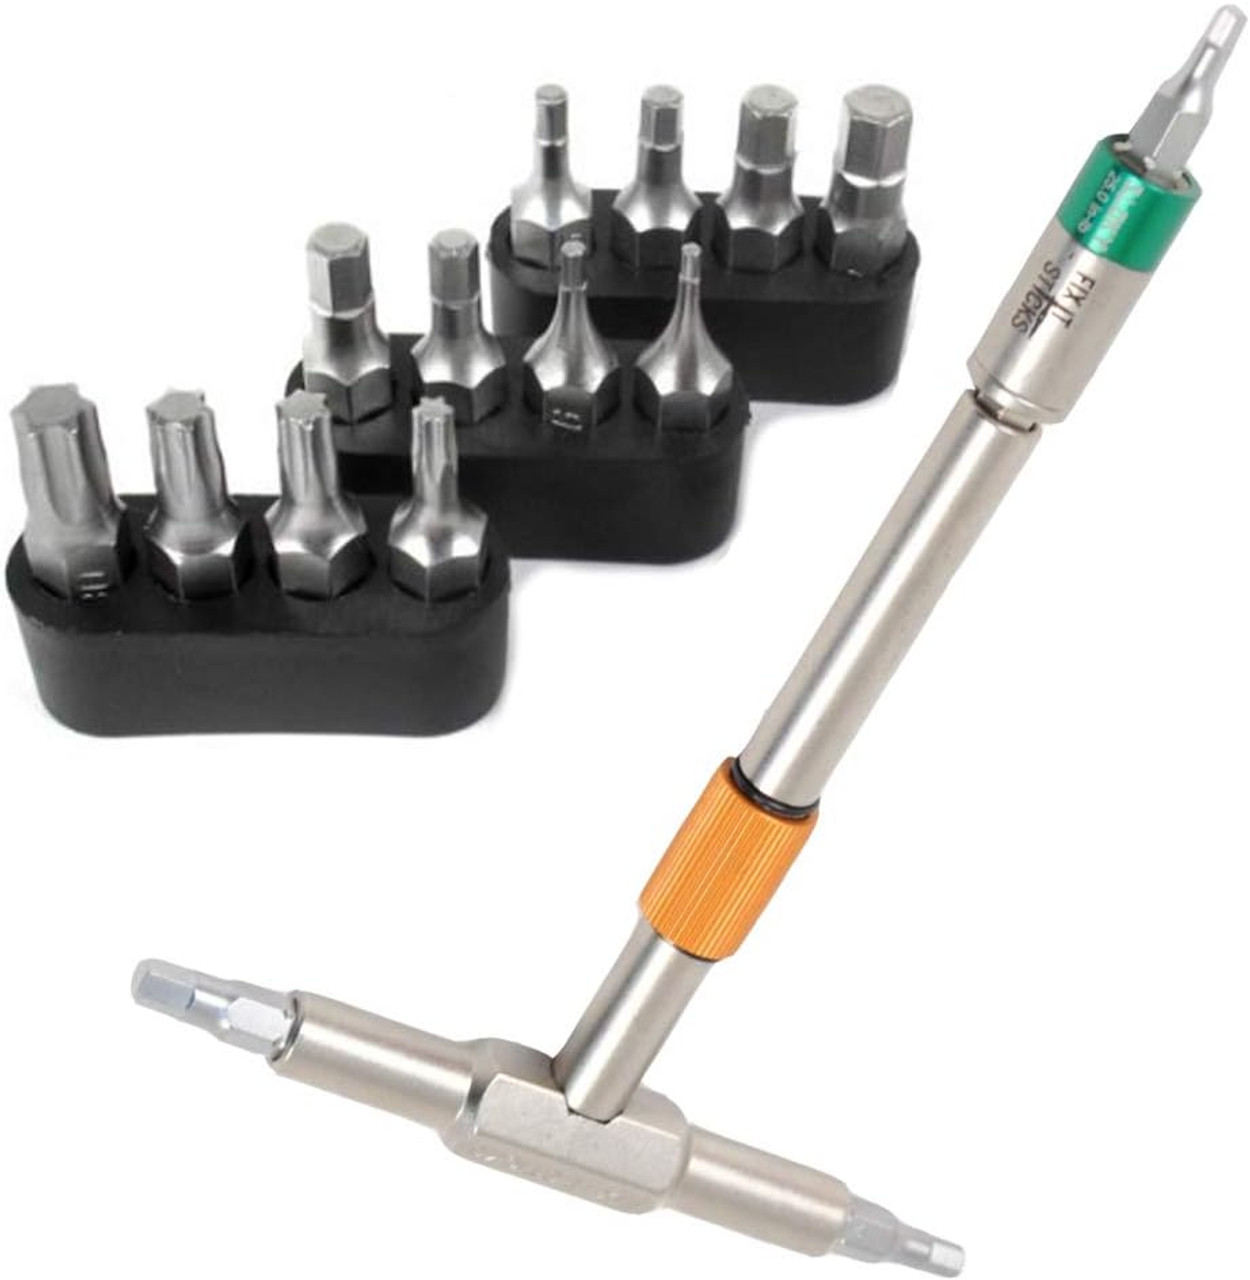 Fix-It Sticks Long-Range Competition Toolkit with All-In-One Torque Driver